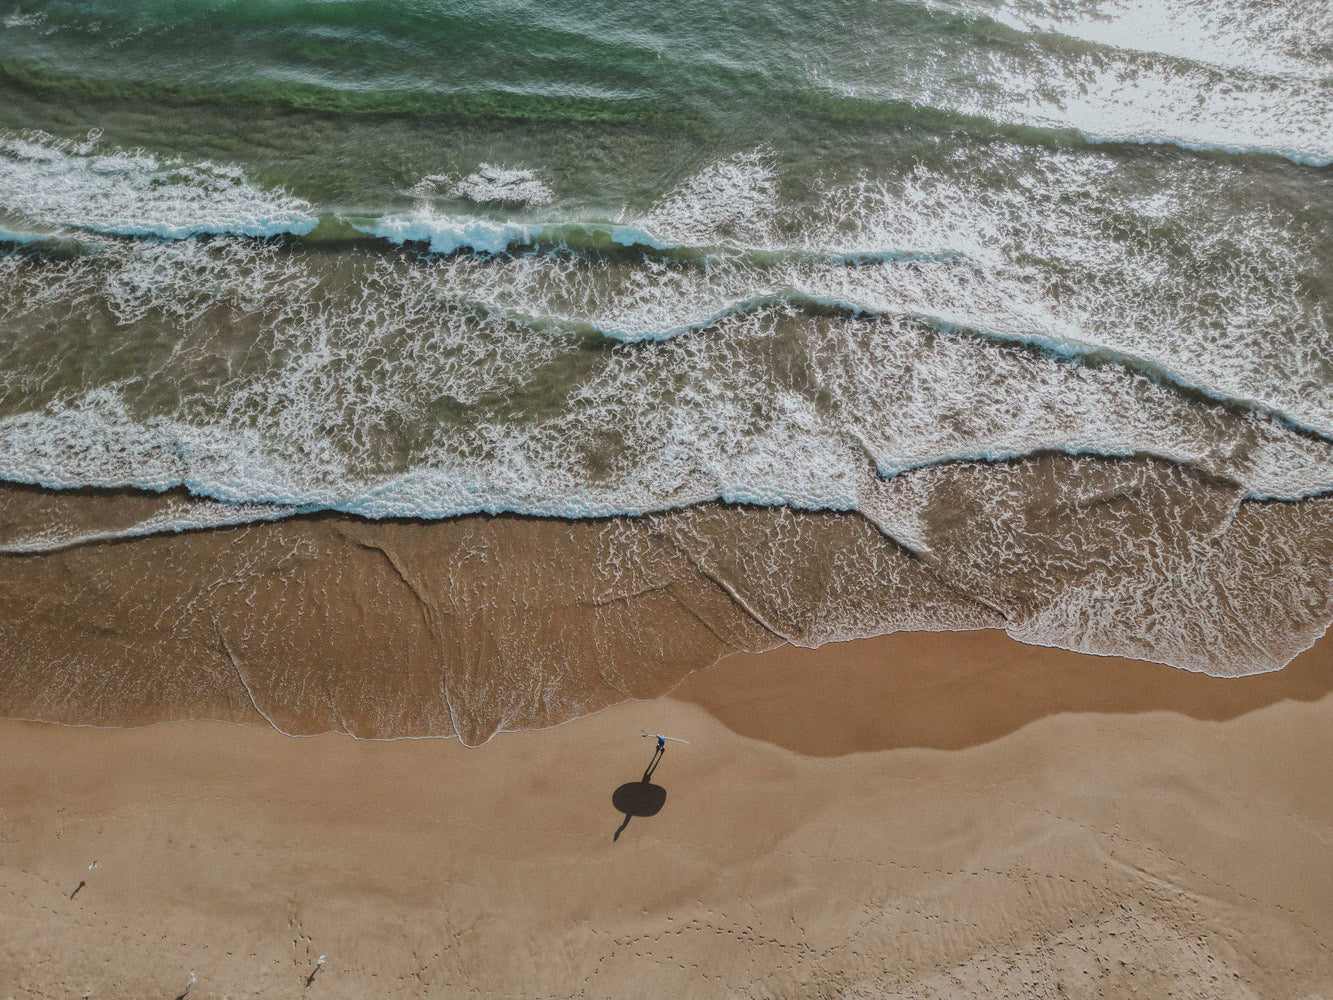 Drone view from above of a beach in Australia with a surfer walking along the beach with surfboard in hand